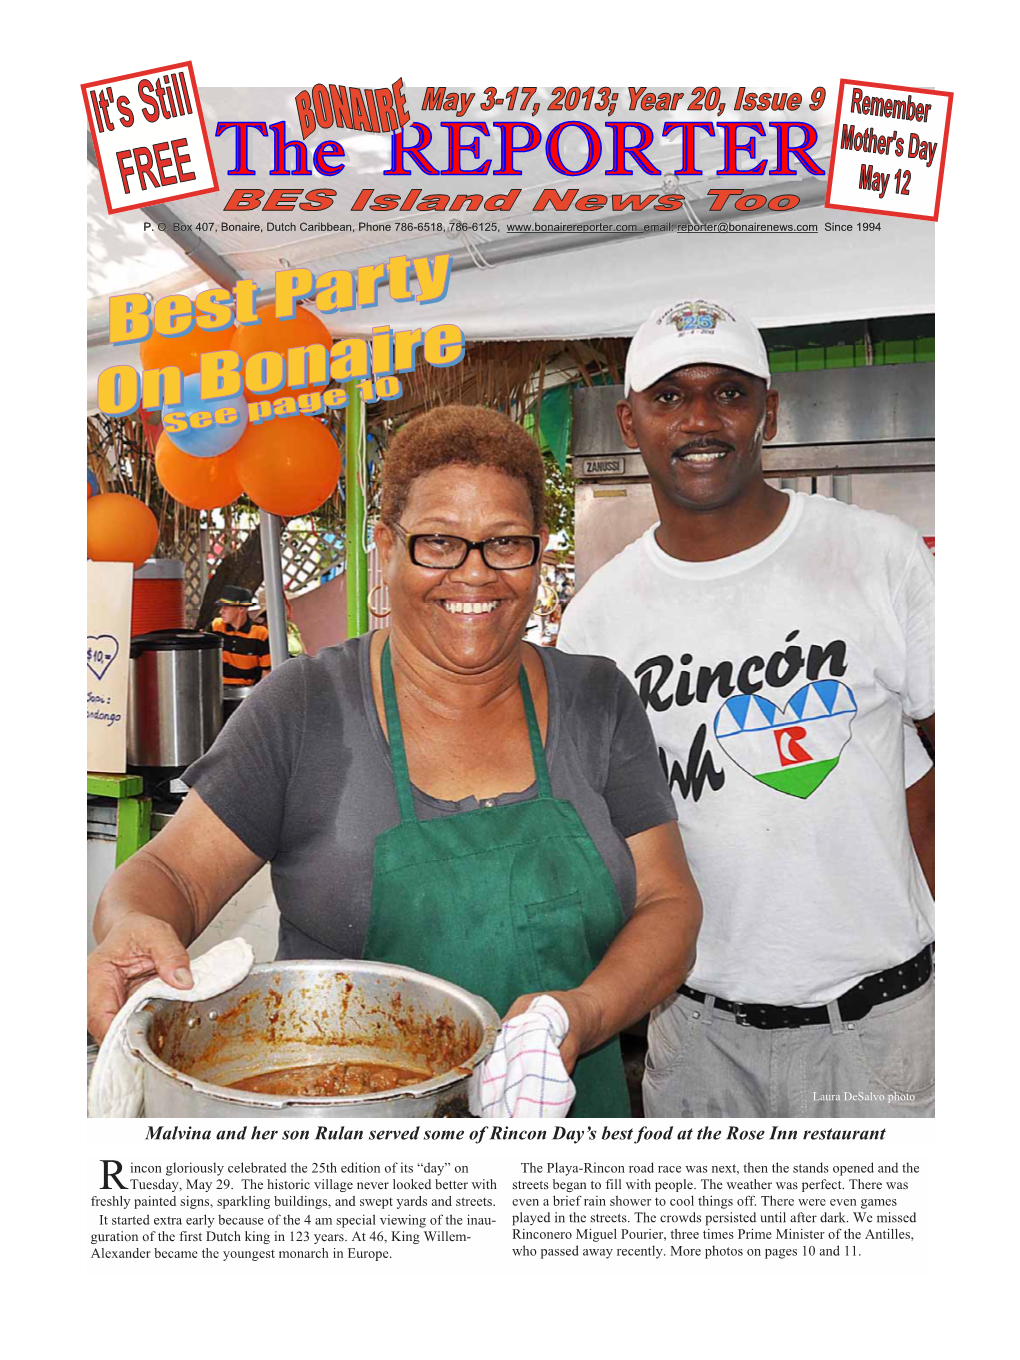 Malvina and Her Son Rulan Served Some of Rincon Day's Best Food